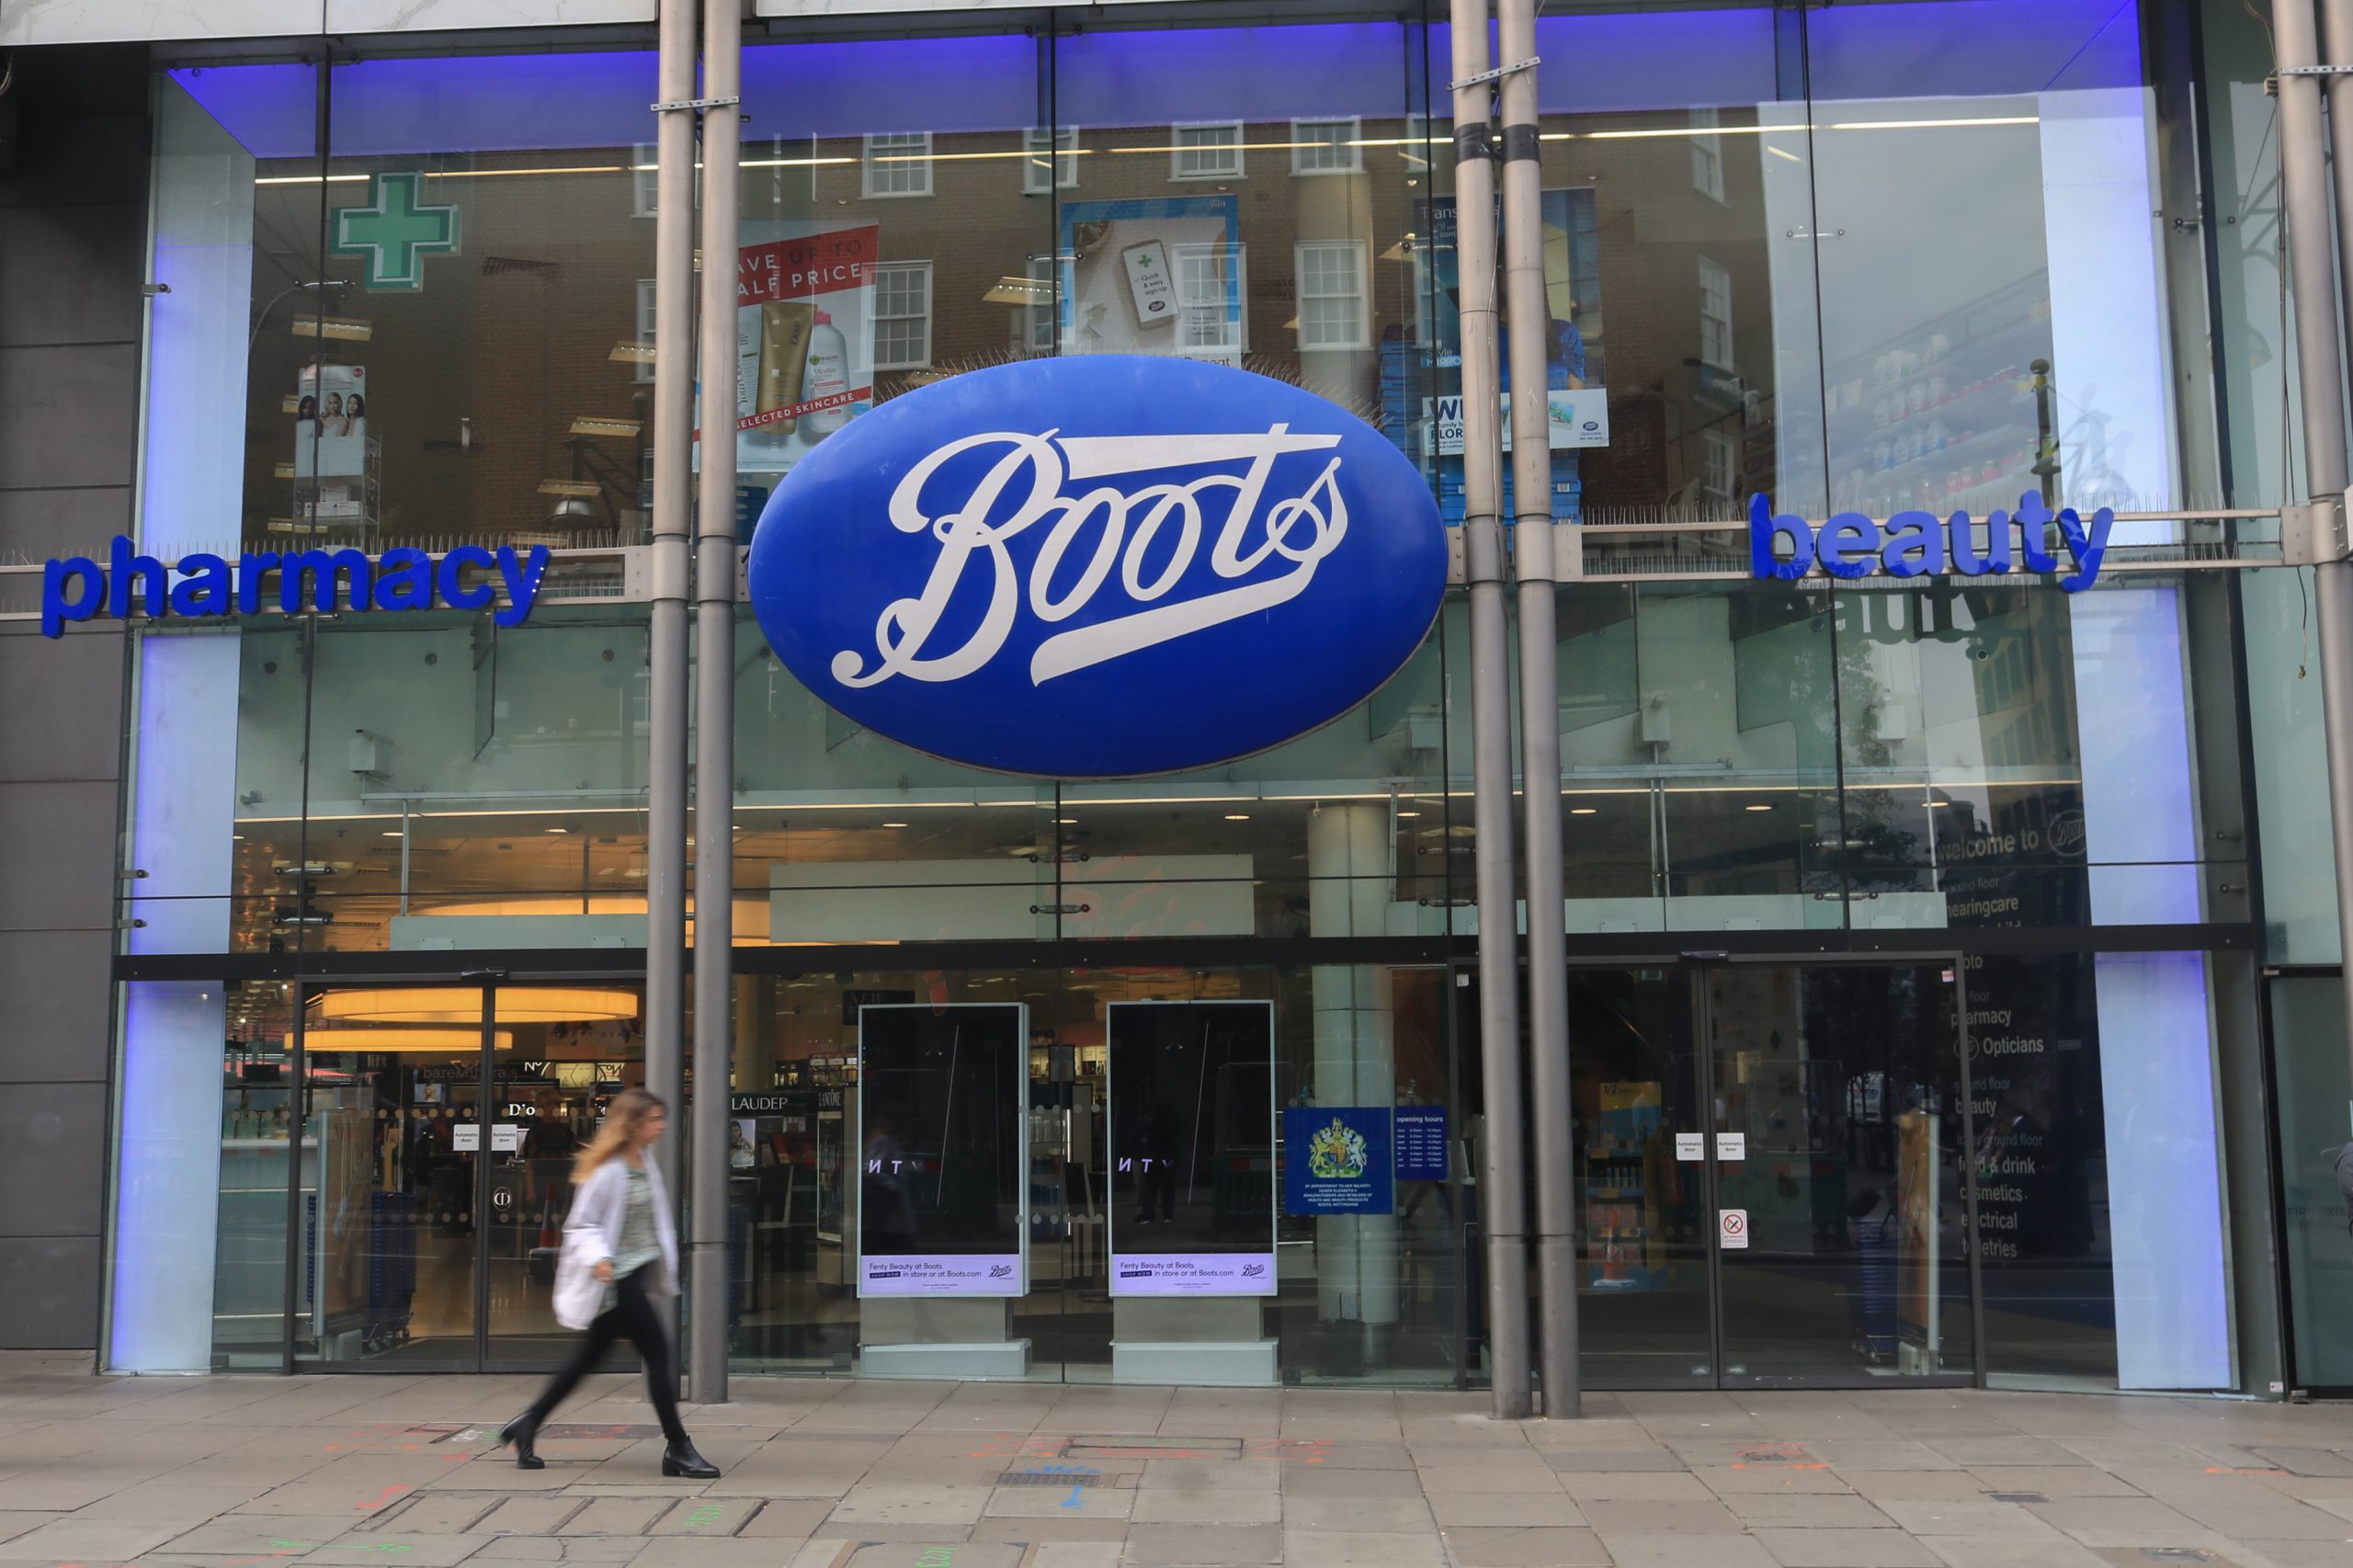 This secret Boots reward scheme will give you more than double the points